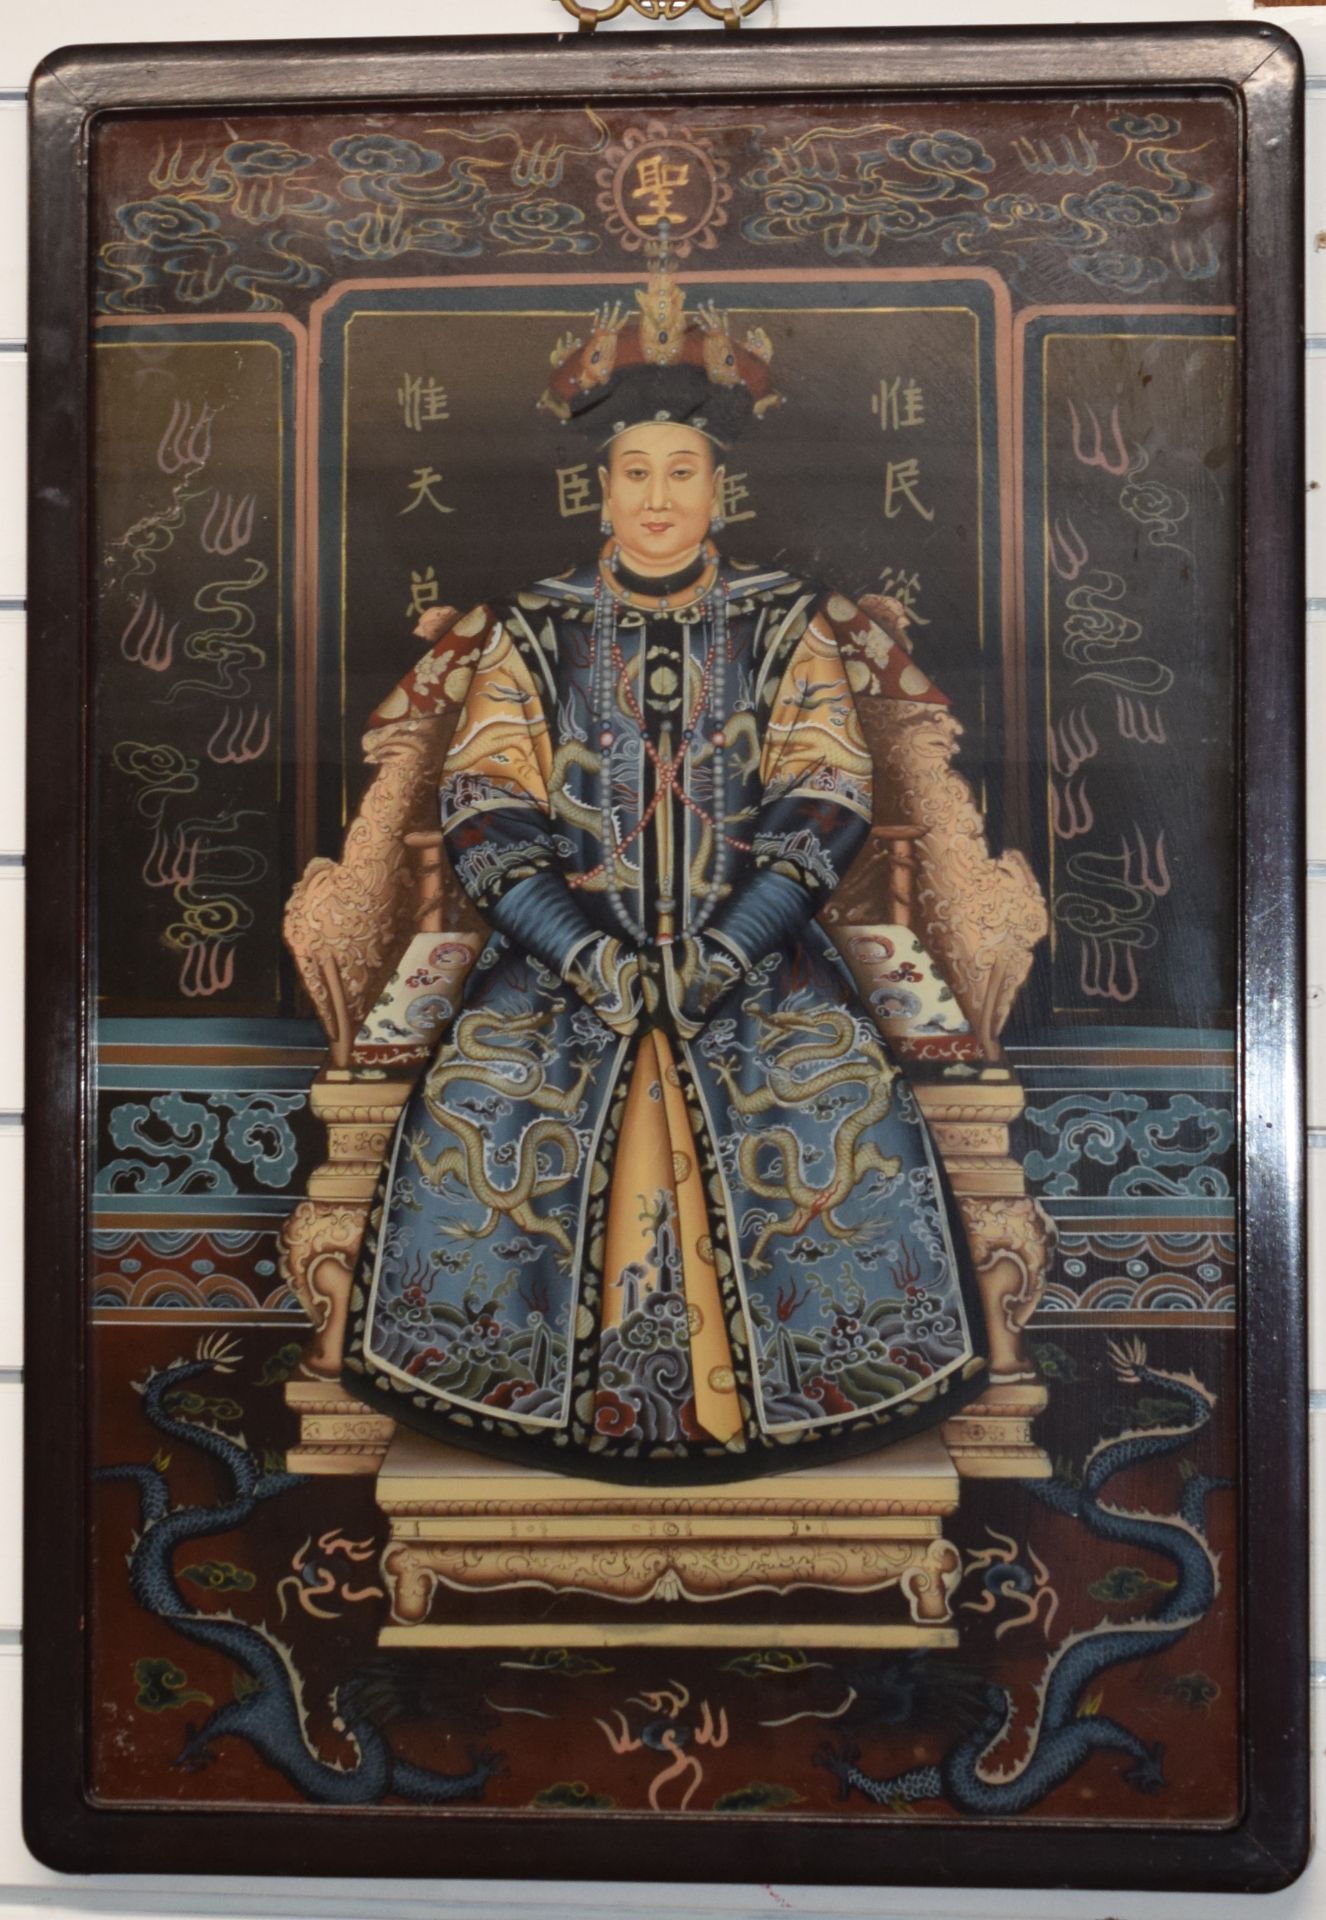 Vintage Chinese Reverse Oil On Glass Portraits Of The First Emperor & Empress Of China - Image 3 of 4